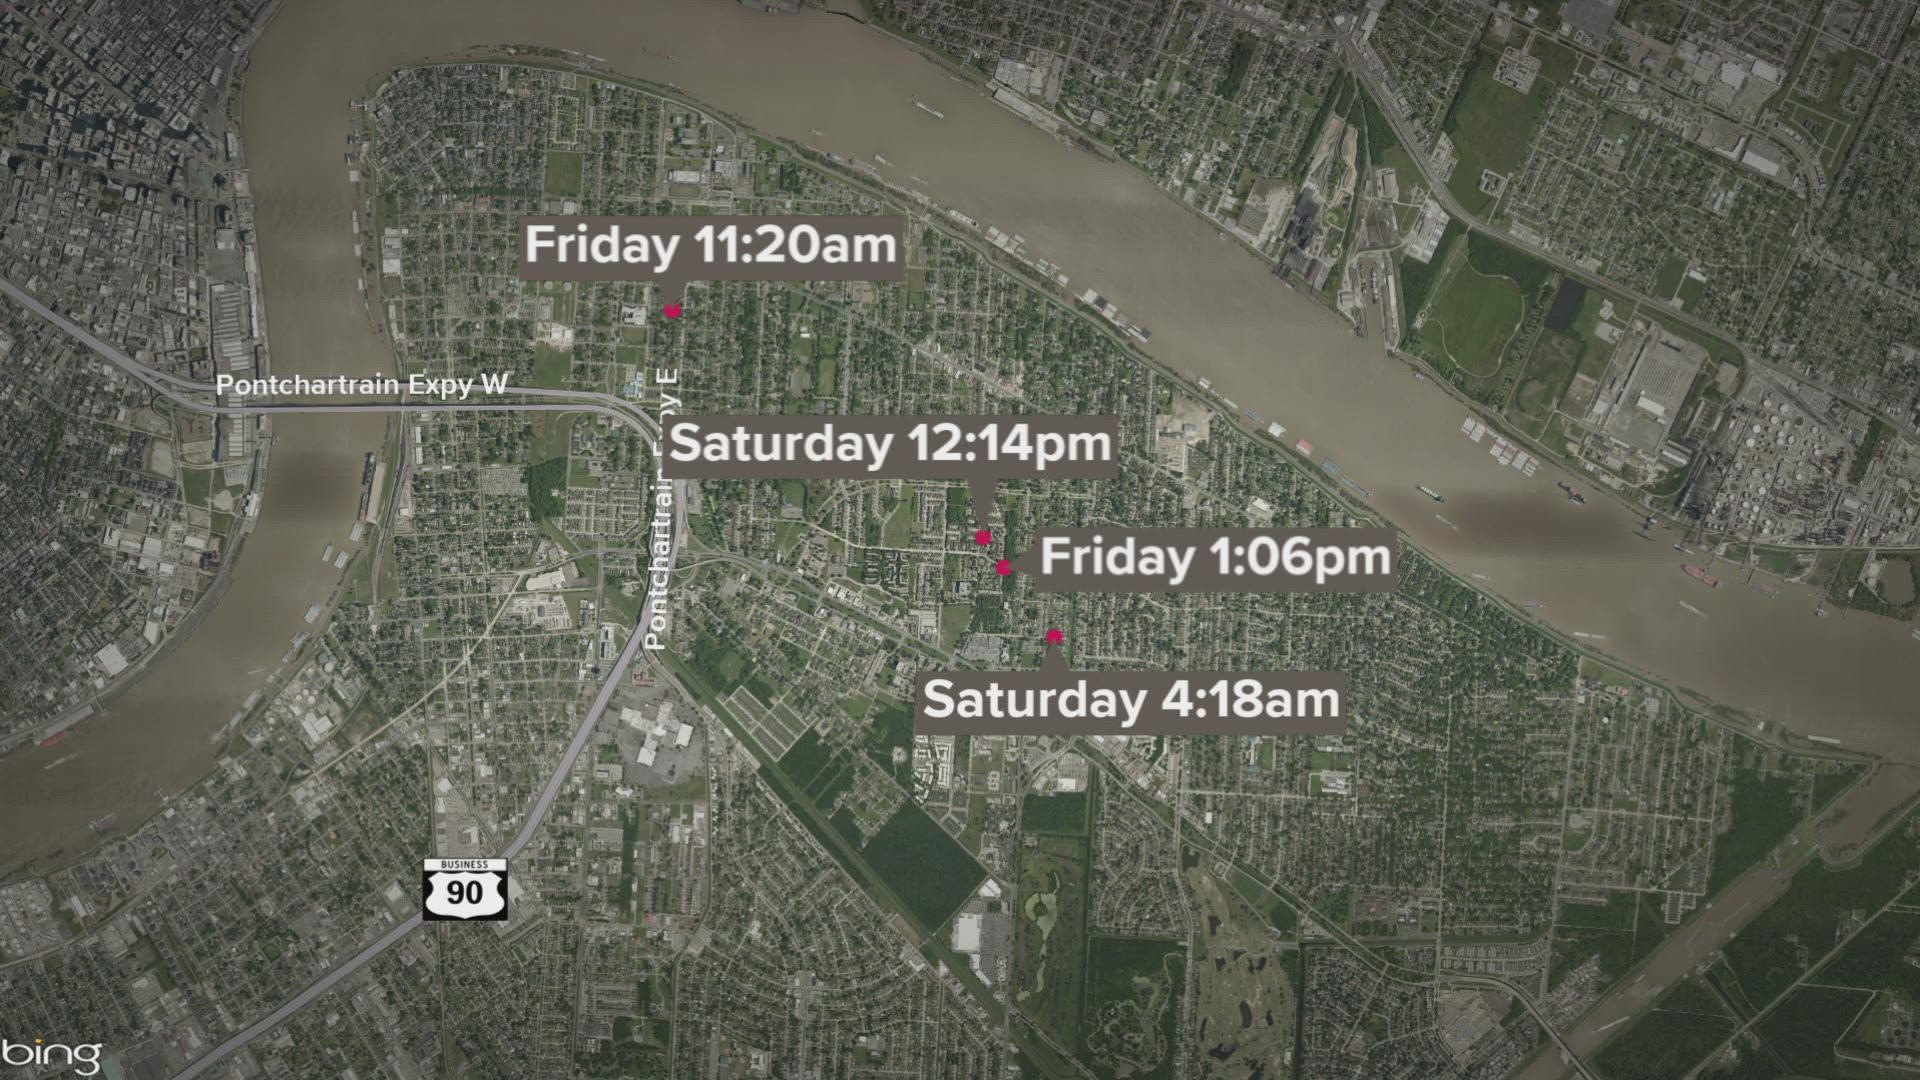 Five shootings happened within 24-hours Friday and Saturday. All of the shootings claimed the victims' lives. NOPD is investigating.